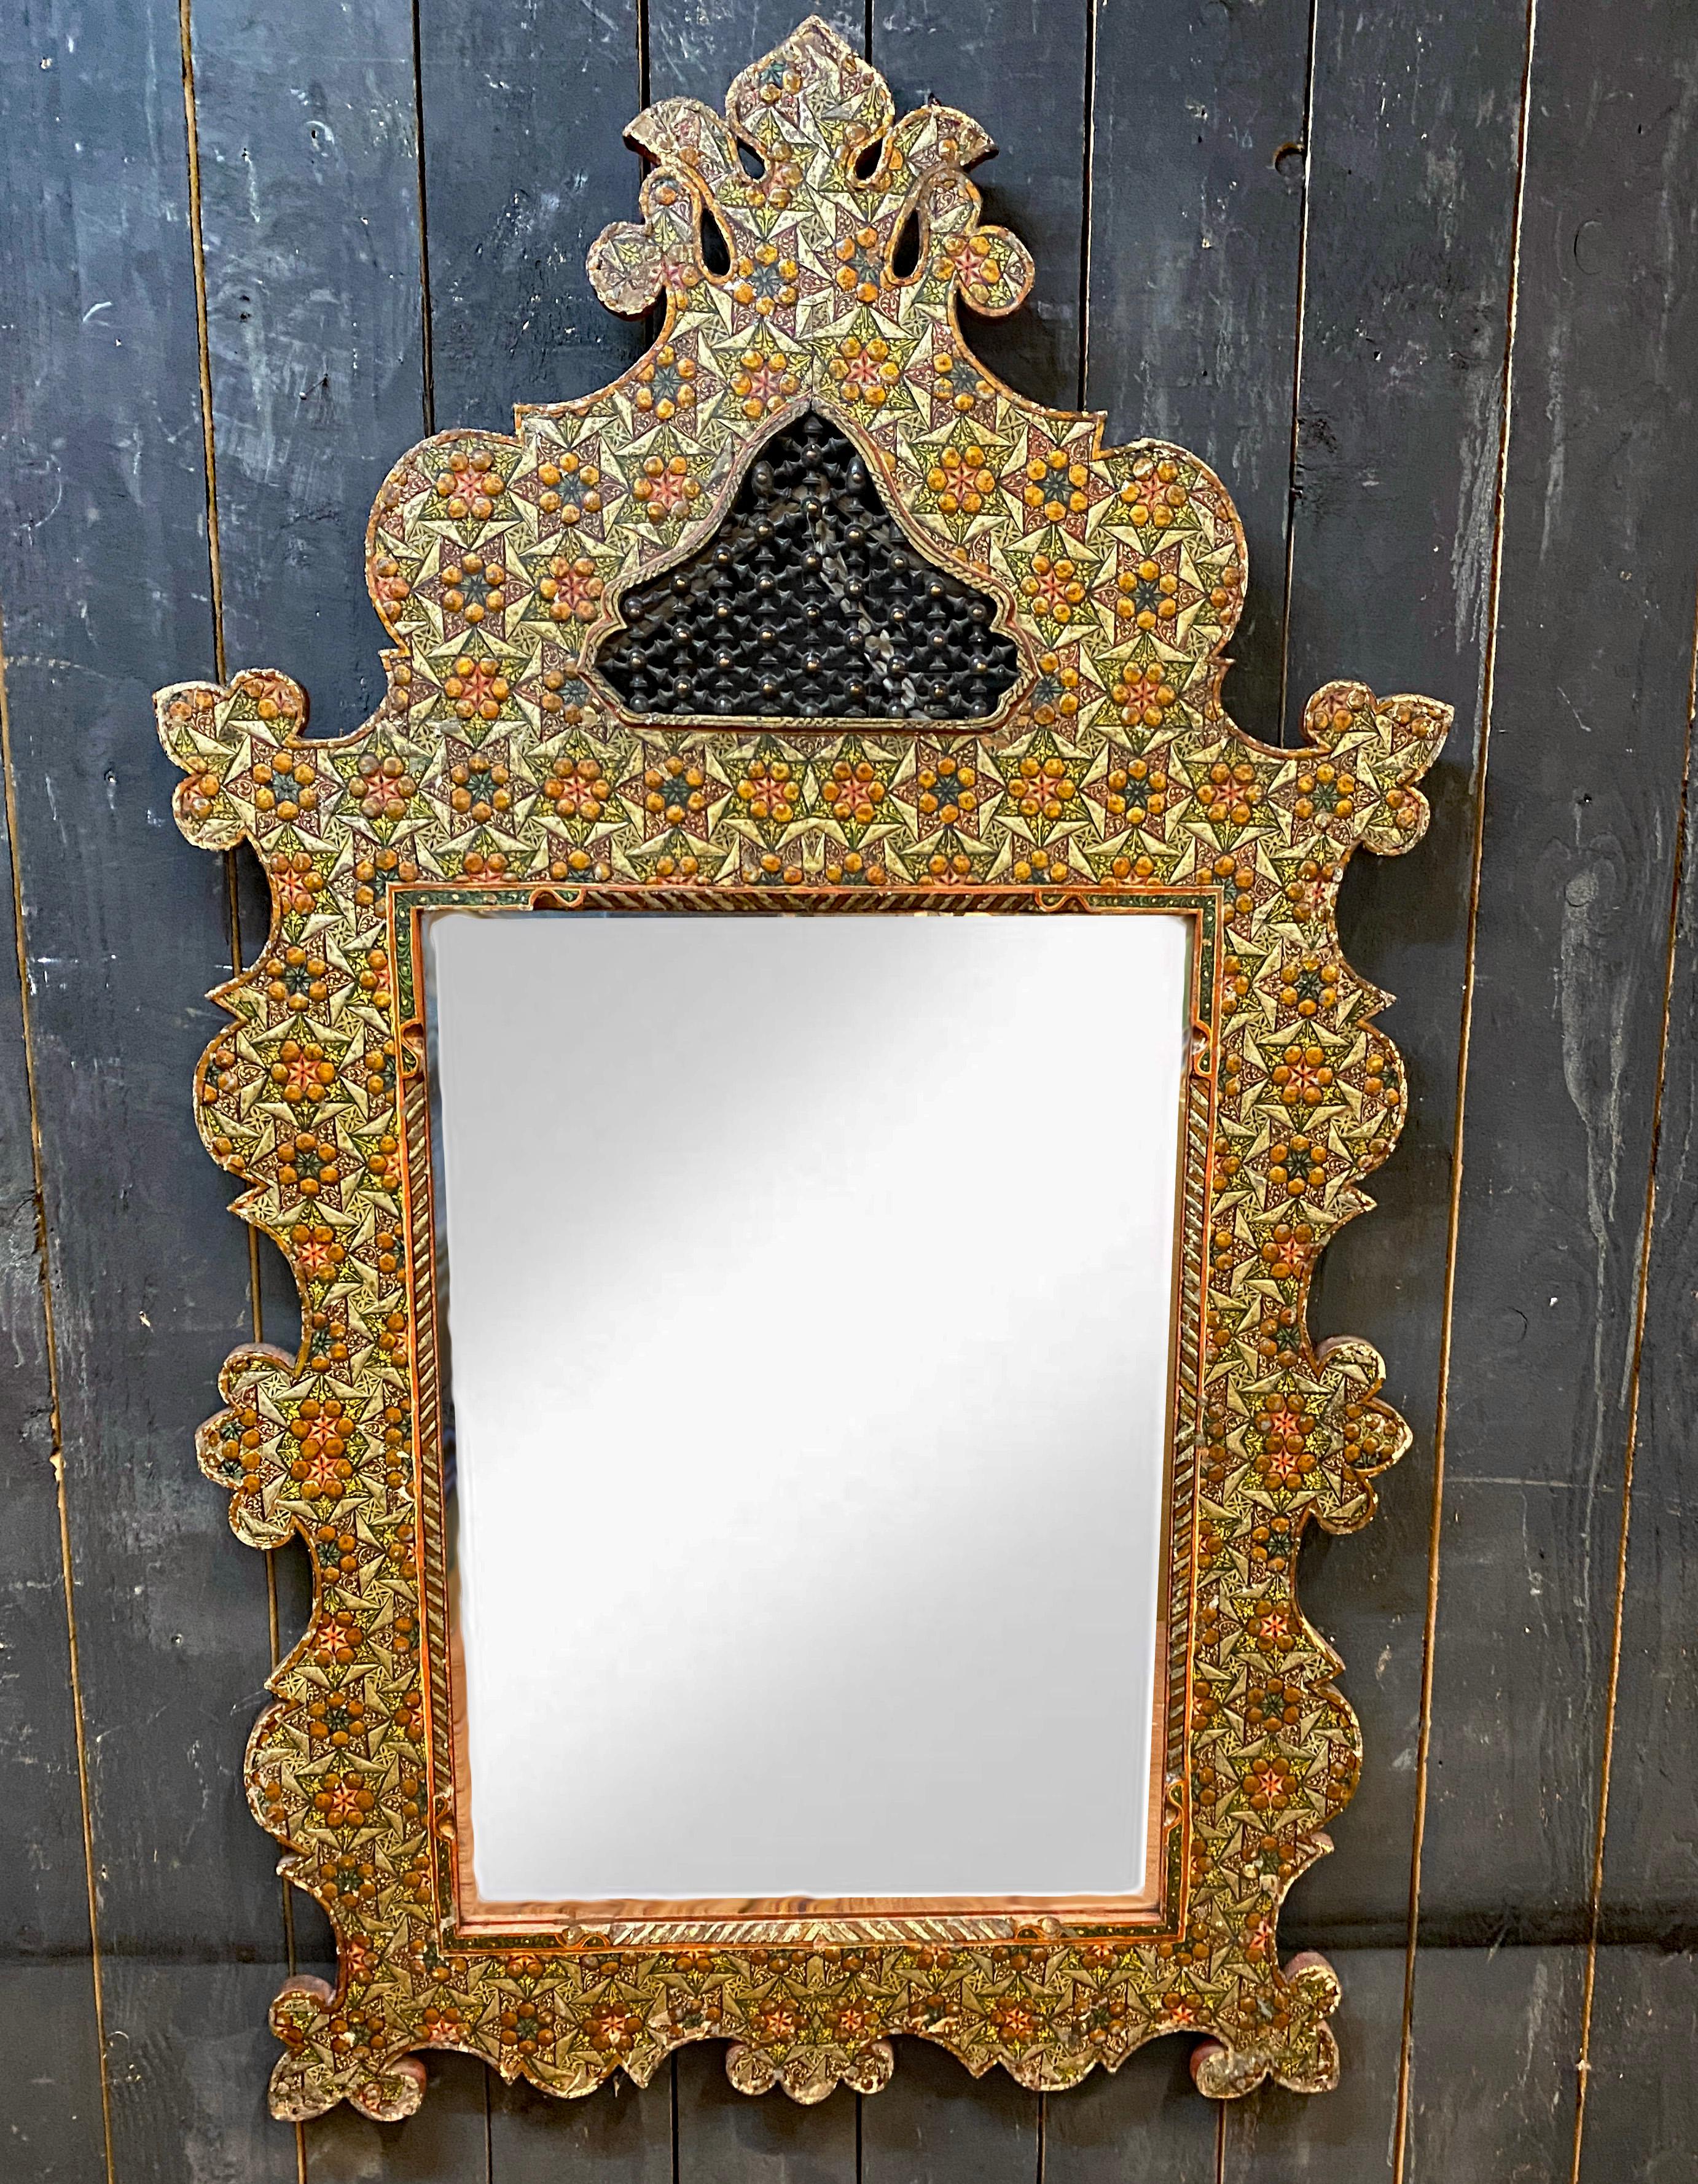 Old large oriental mirror in engraved and polychromed wood;
beveled mirror
small paint losses